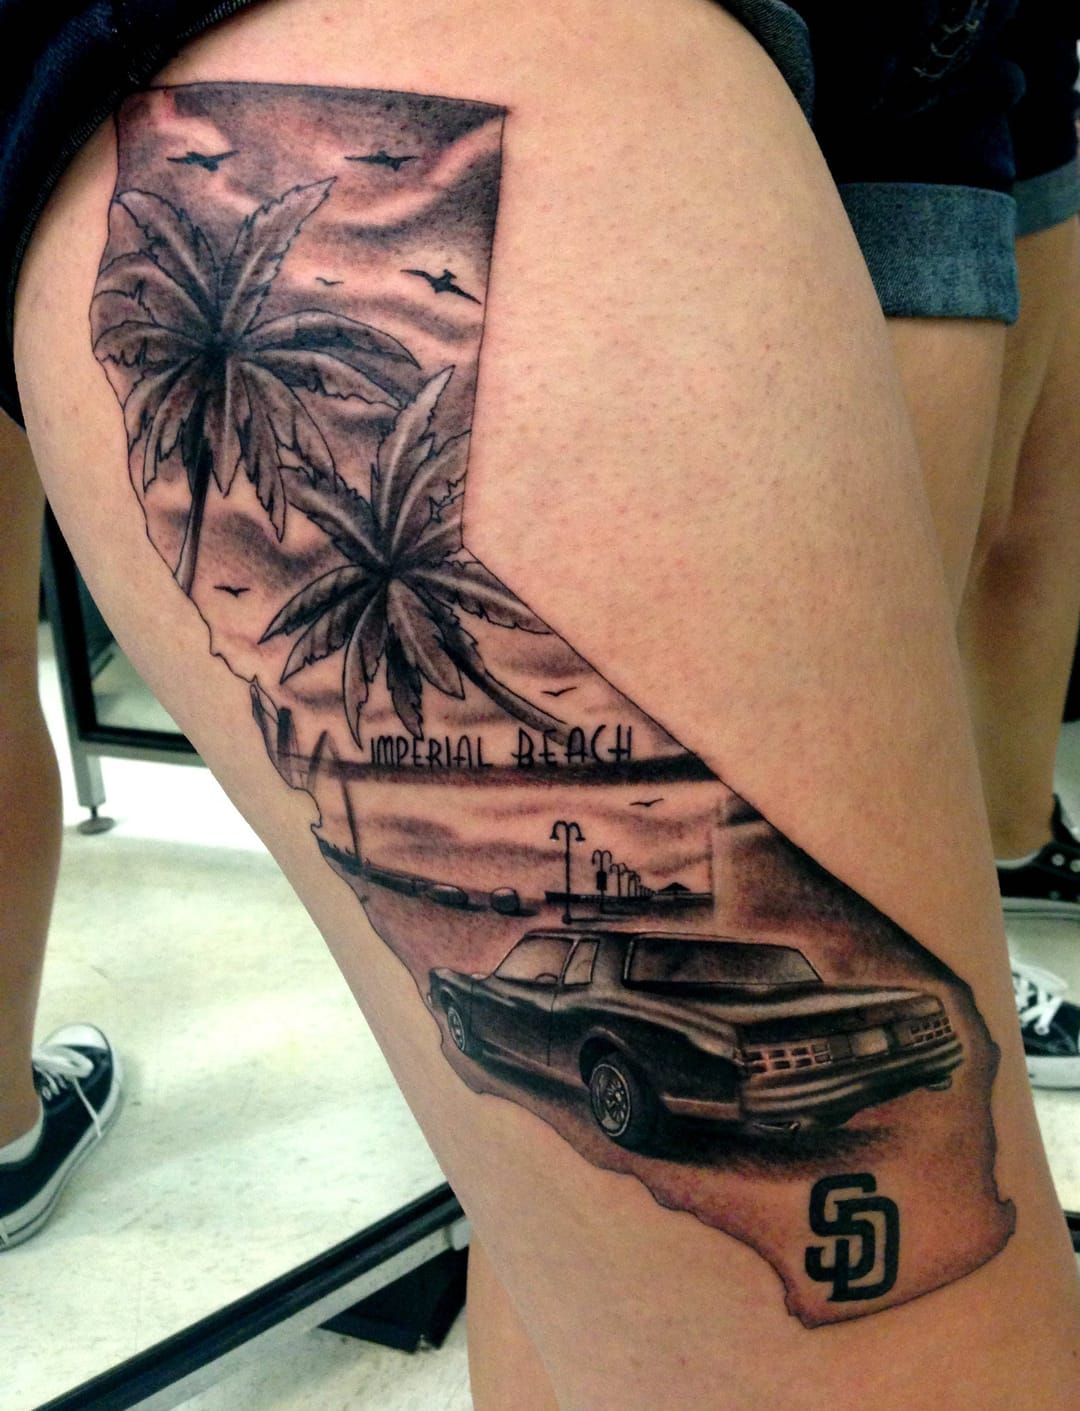 52 State Outline Tattoos And Other Hometown Ink-Spiration For